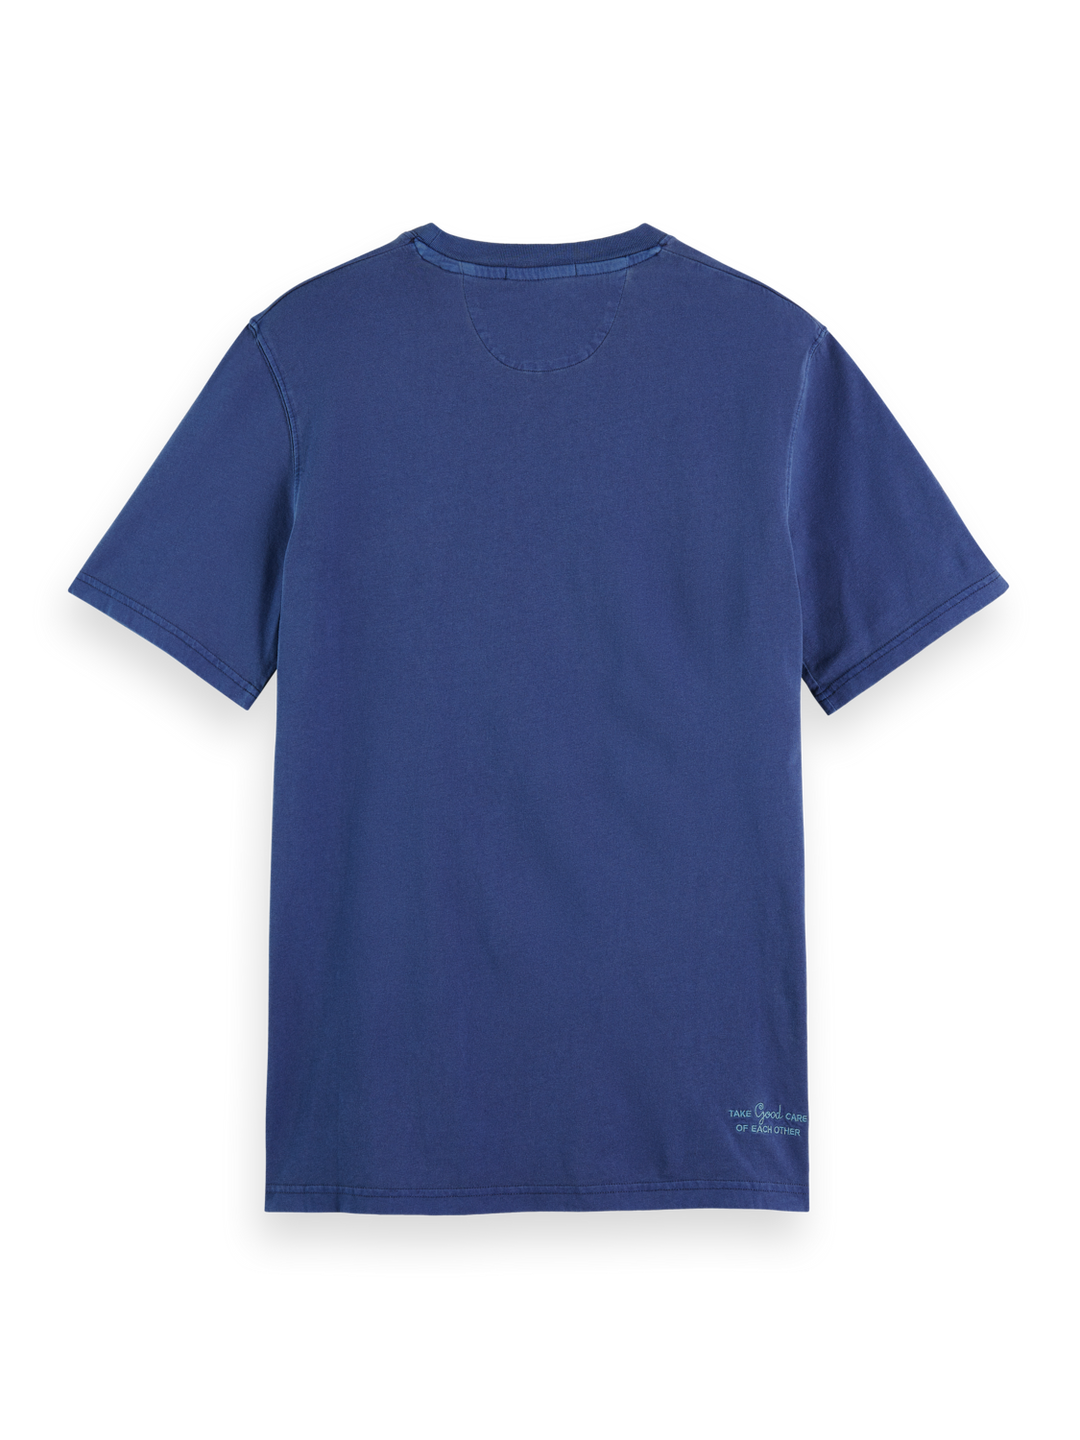 Regular Fit Garment Dyed Tee in Marine | Buster McGee